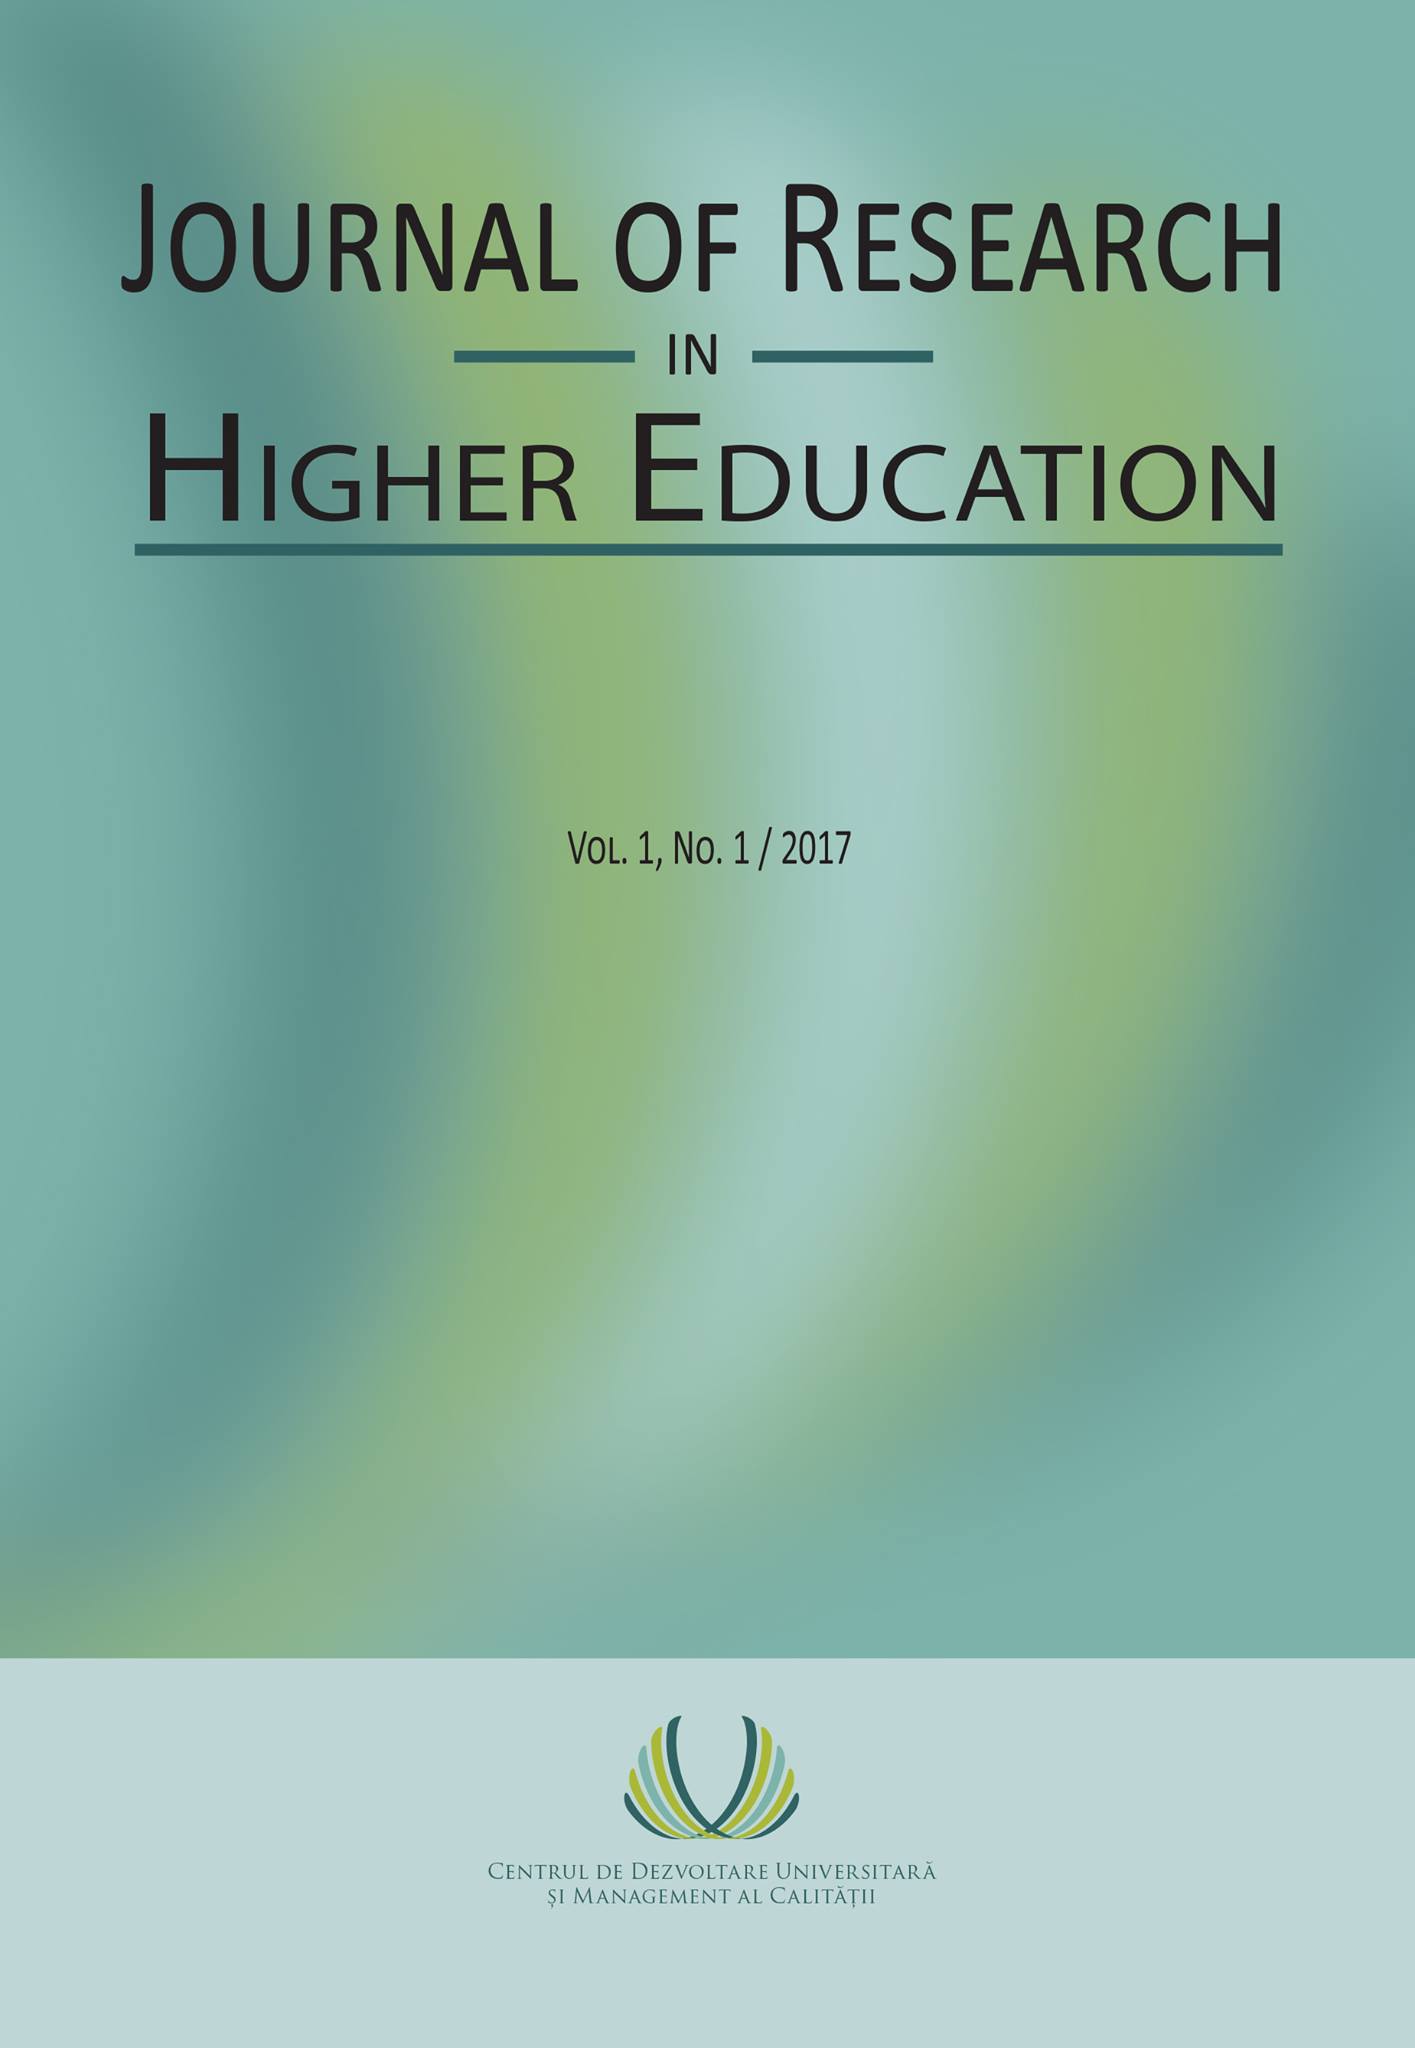 A Brief Rationale for a New Journal in the Field of Higher Education Cover Image